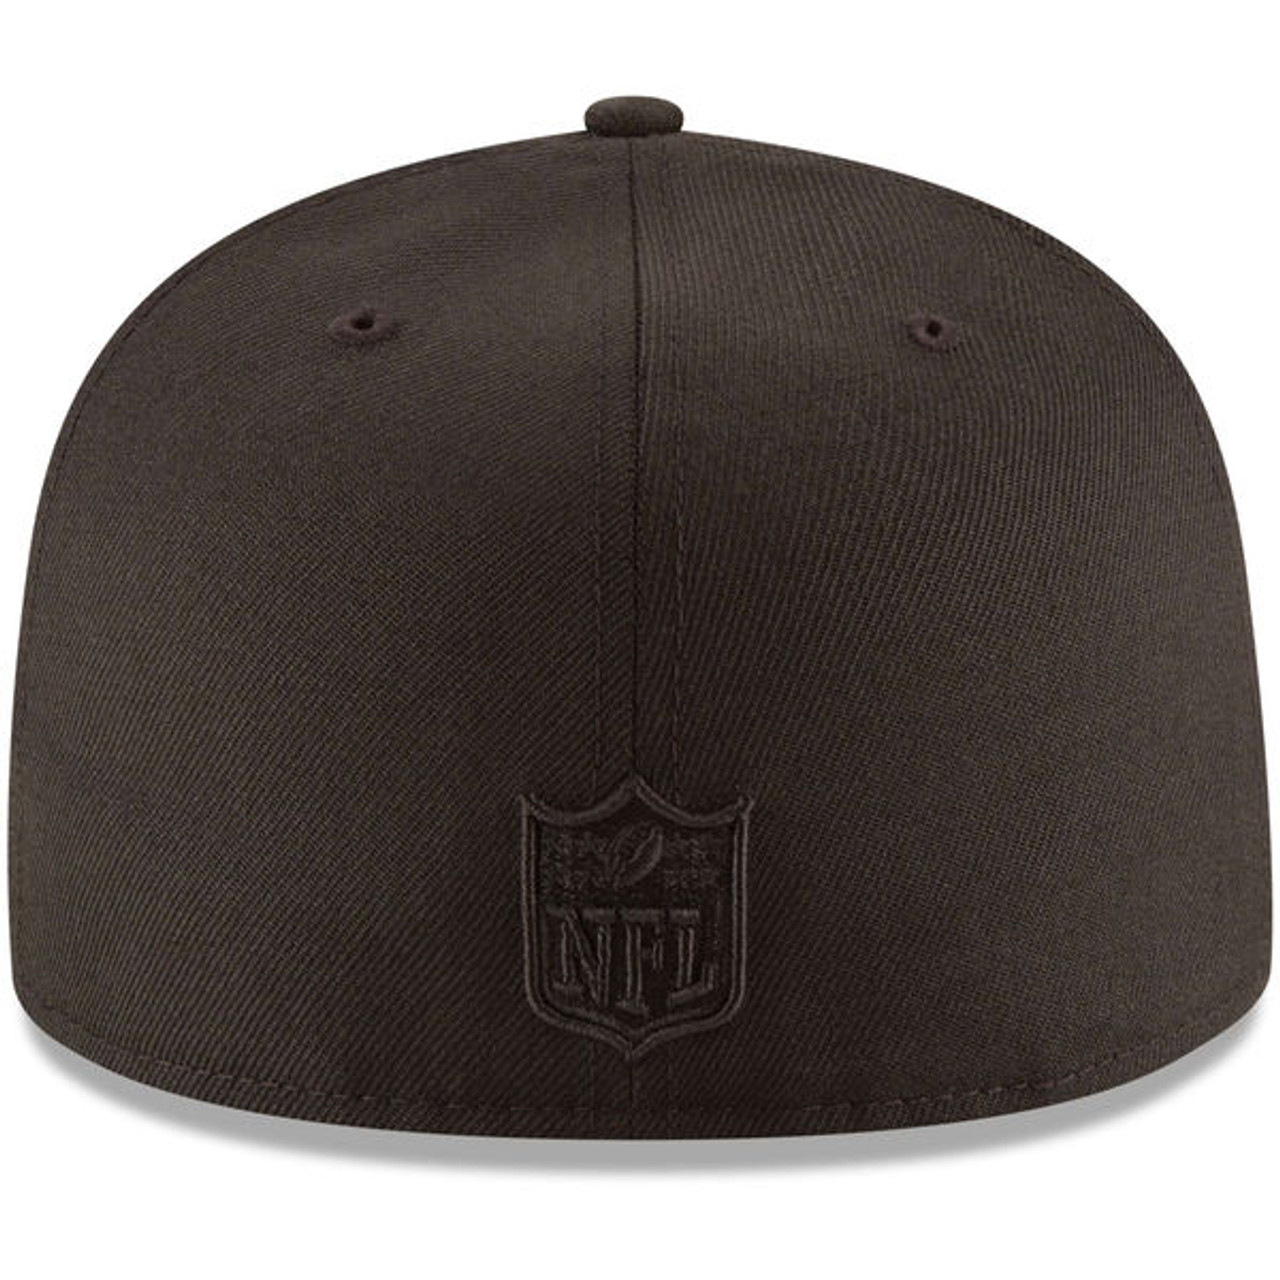 Men's San Francisco 49ers New Era Black on Black 59FIFTY Fitted Hat